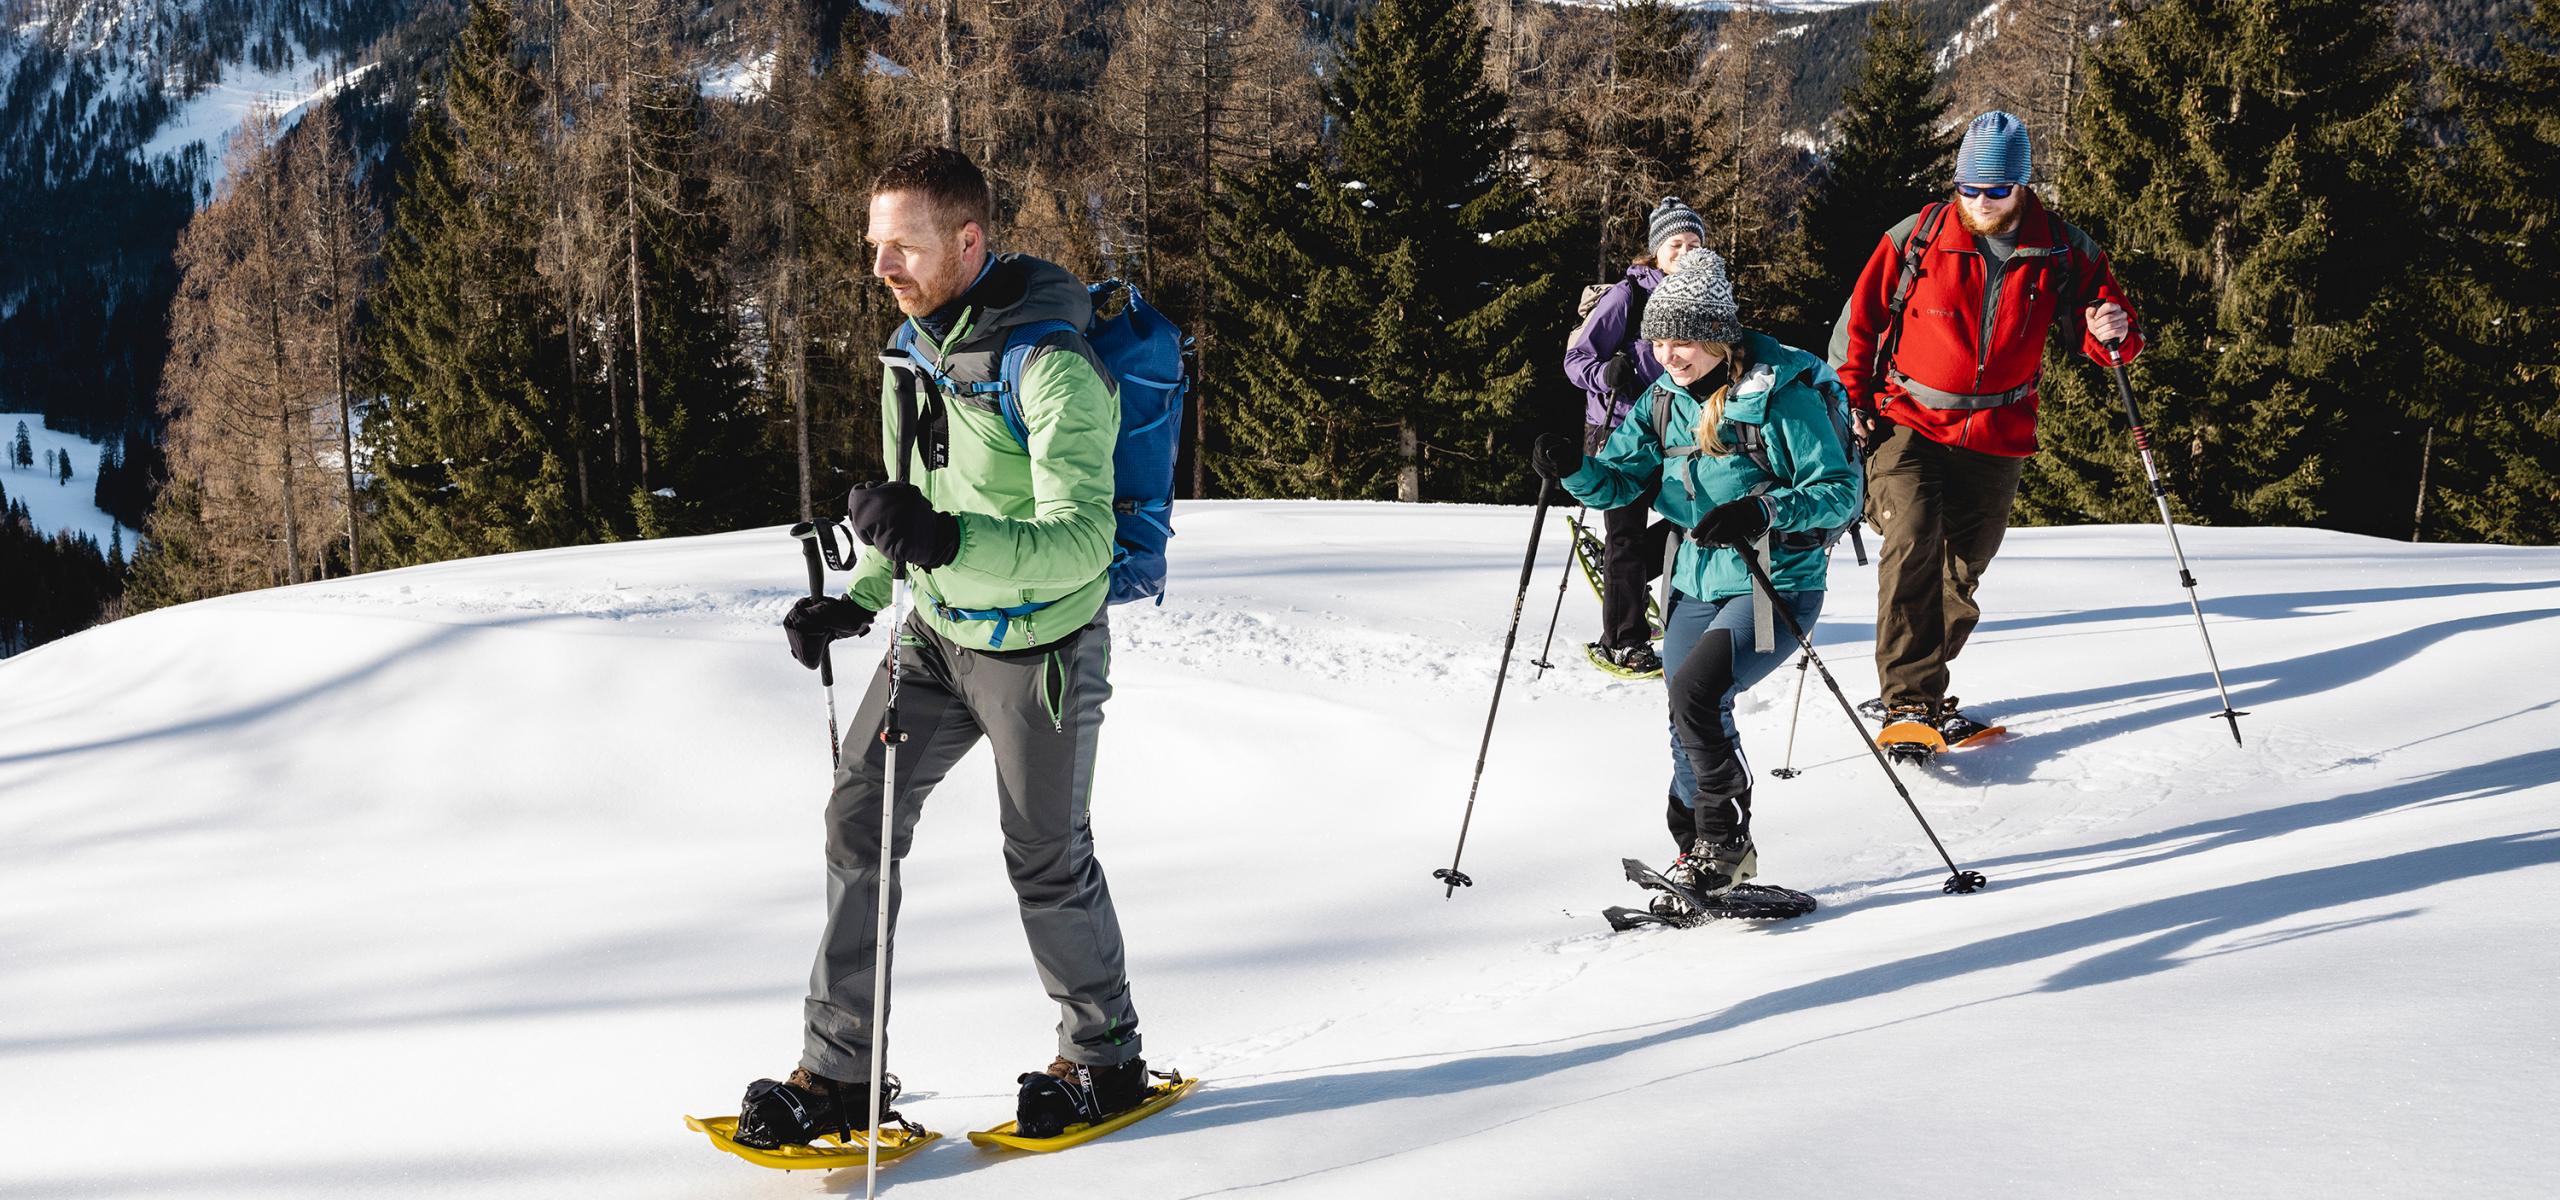 National Park Ranger accompanies three adults on a snowshoe hike